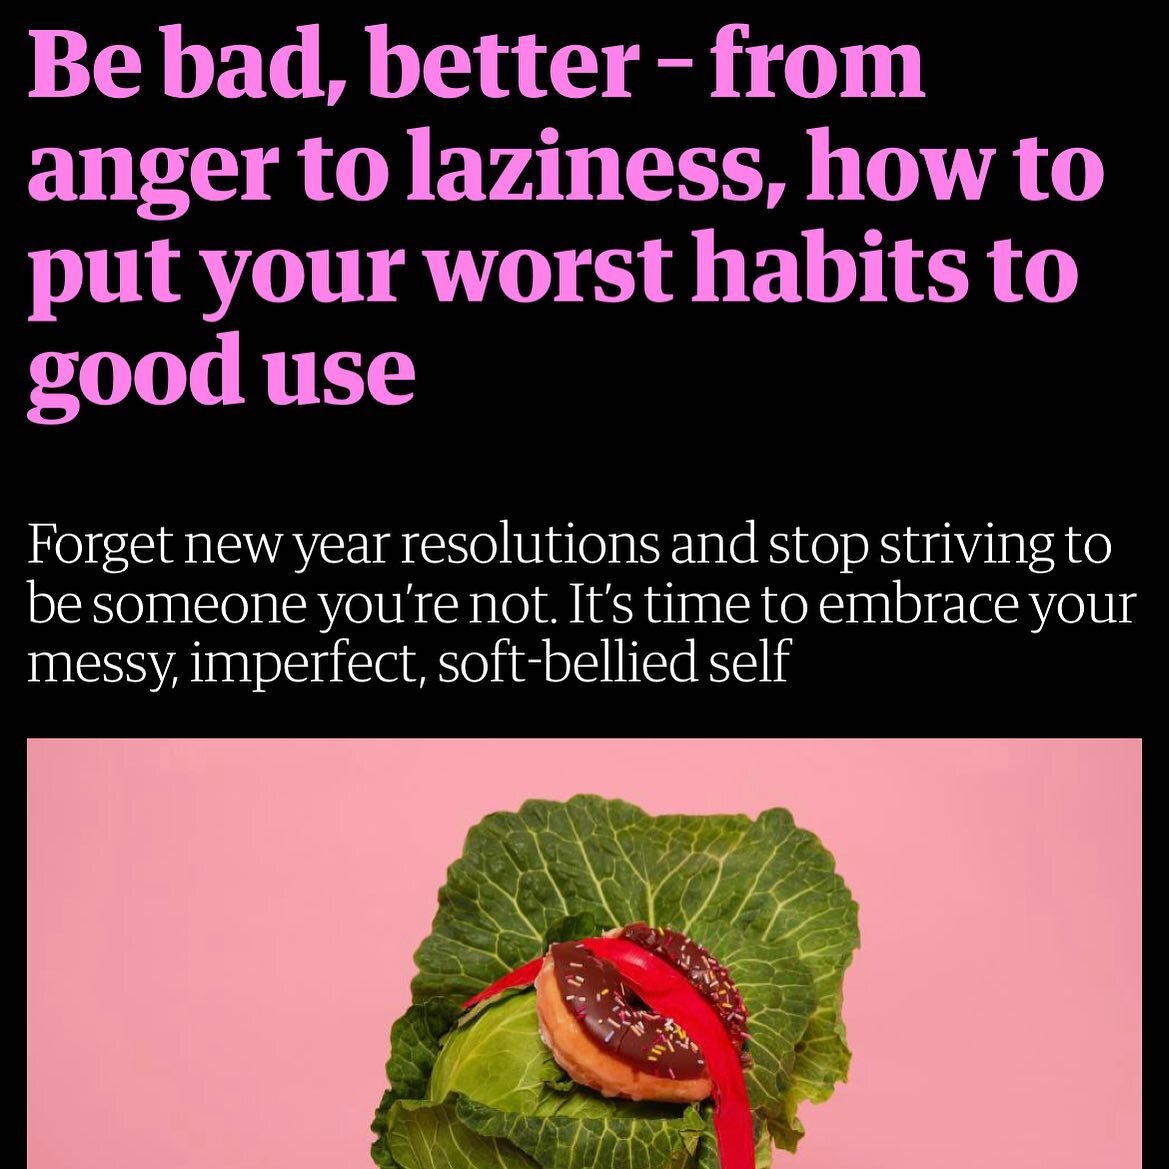 This is a validating and human look at how we can use our uniqueness to our advantage vs. Fighting with ourselves this year 💗. 
Link in story. https://apple.news/ALe-eQxSjS0emyUZnKbwllw
.
.
#resolution #habits #bodyimage #diet #iam #mindfulness #hea